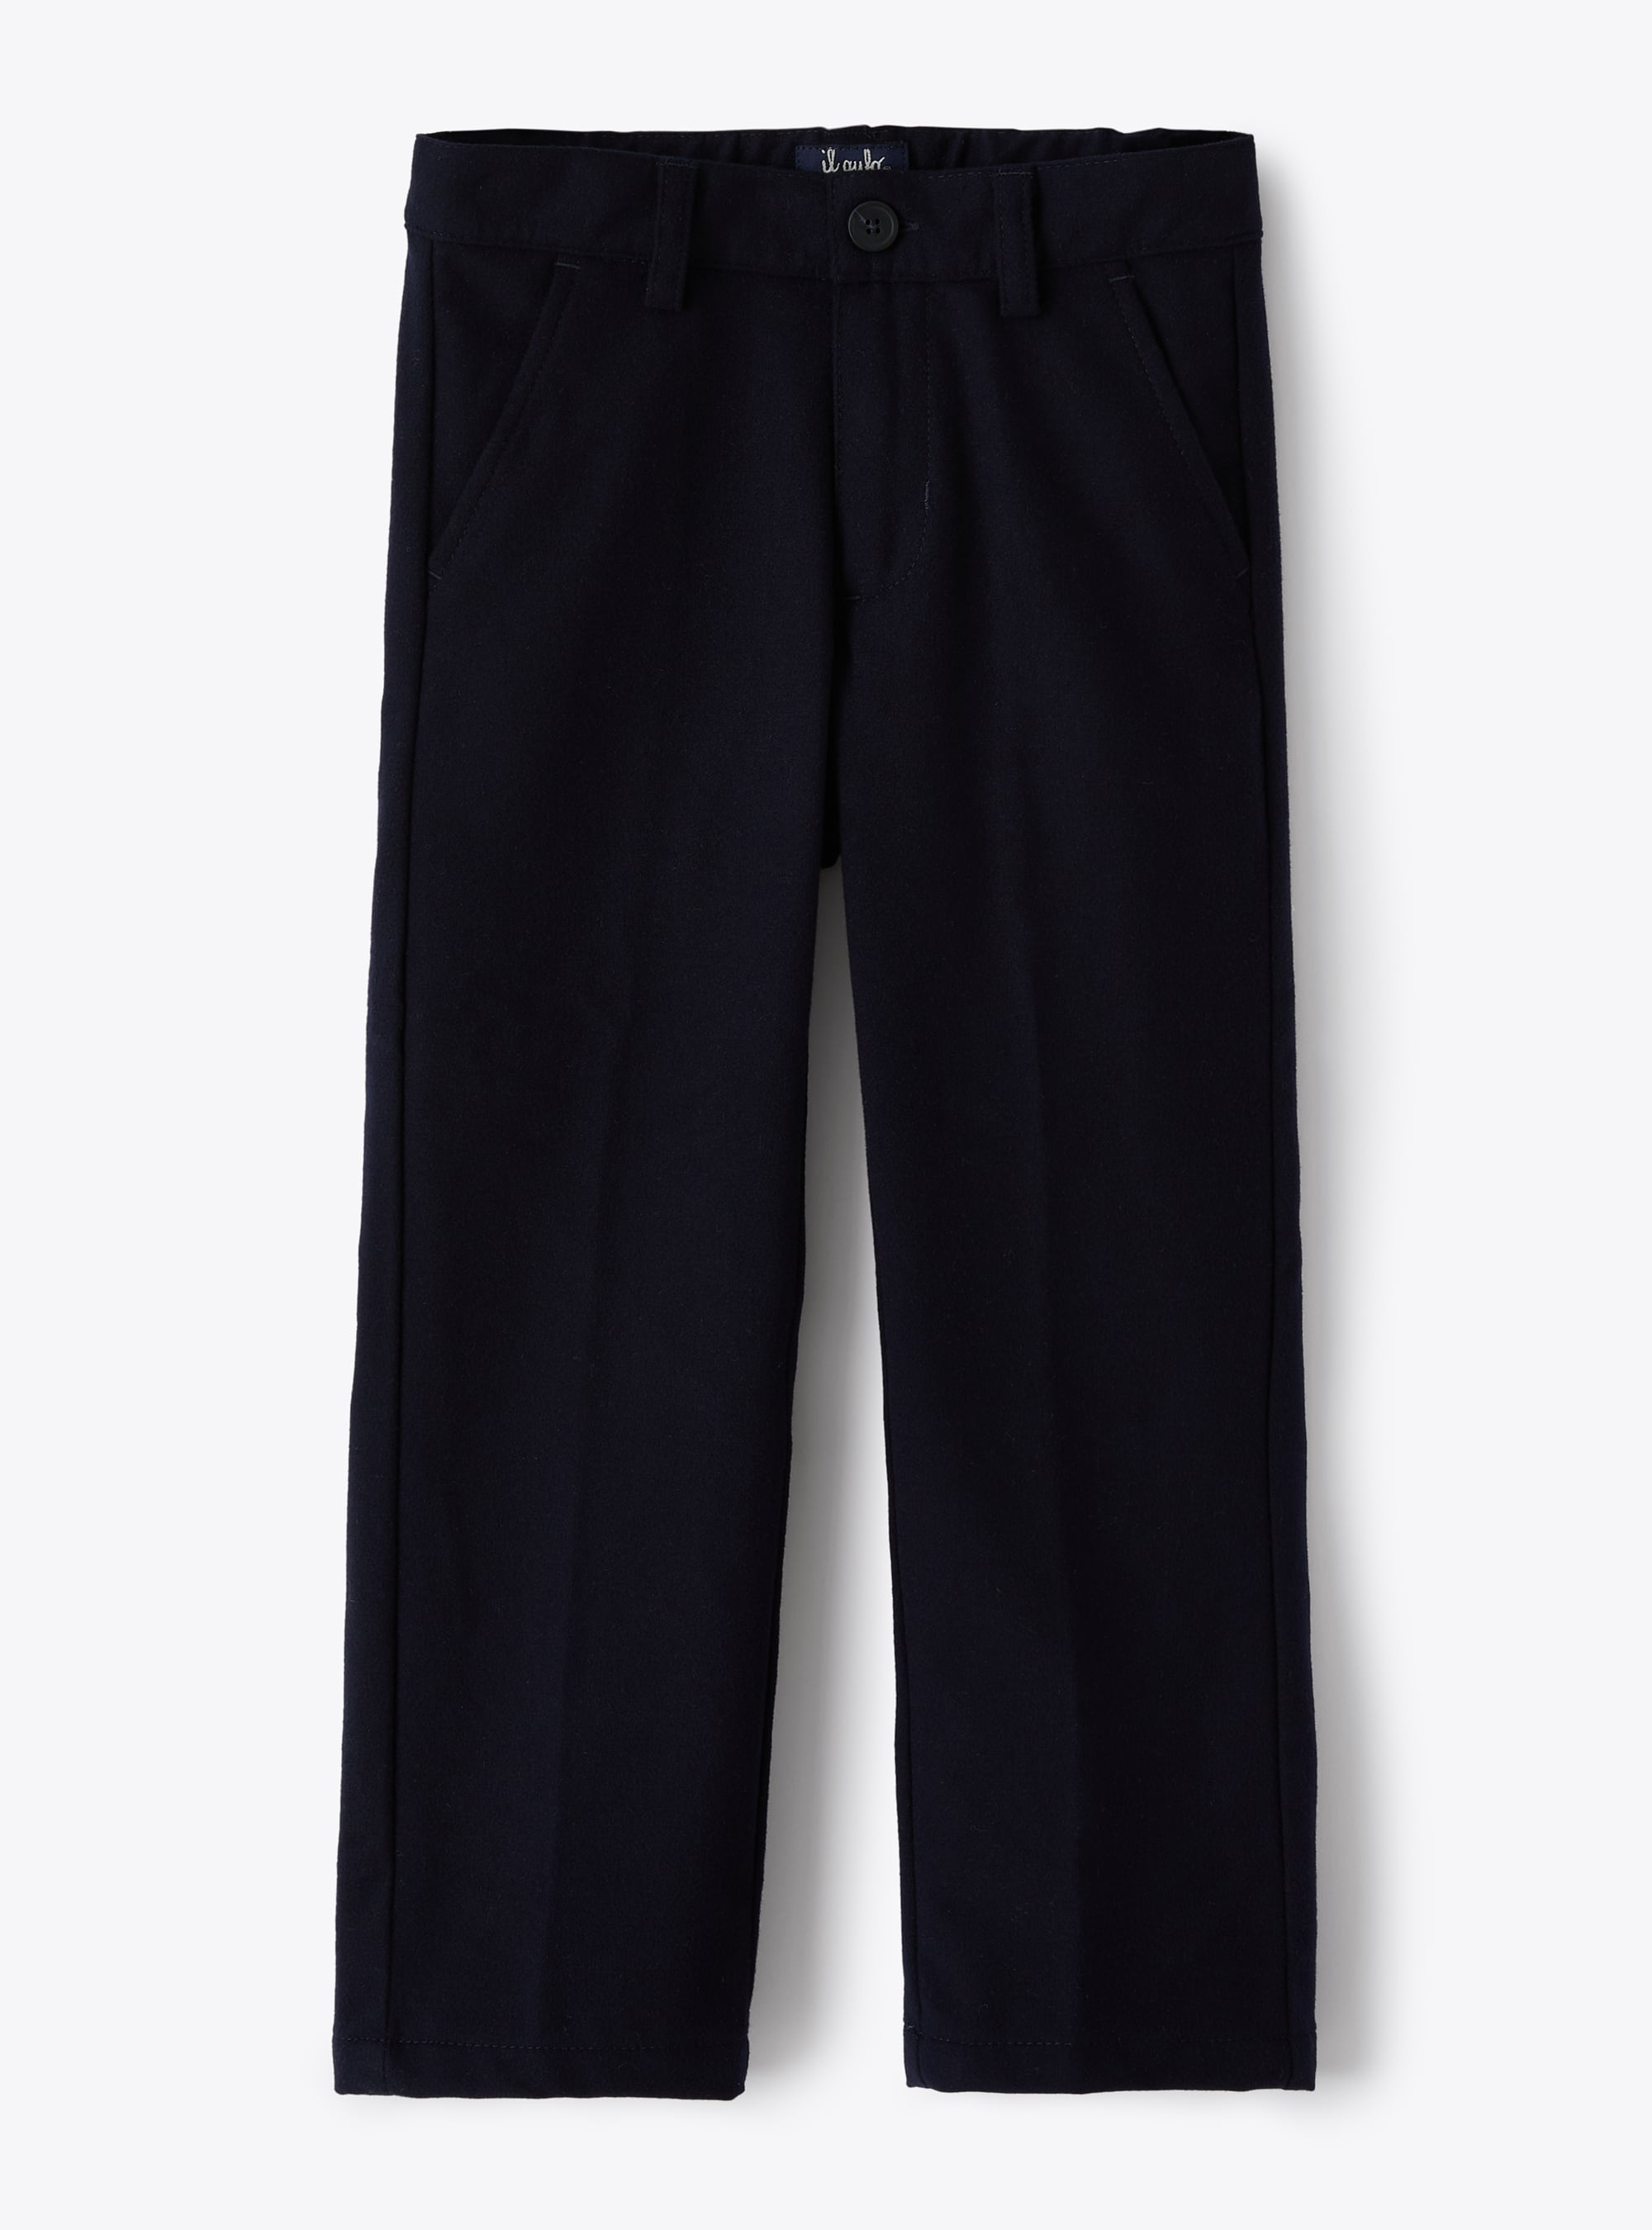 Classic navy technowool trousers - Trousers - Il Gufo